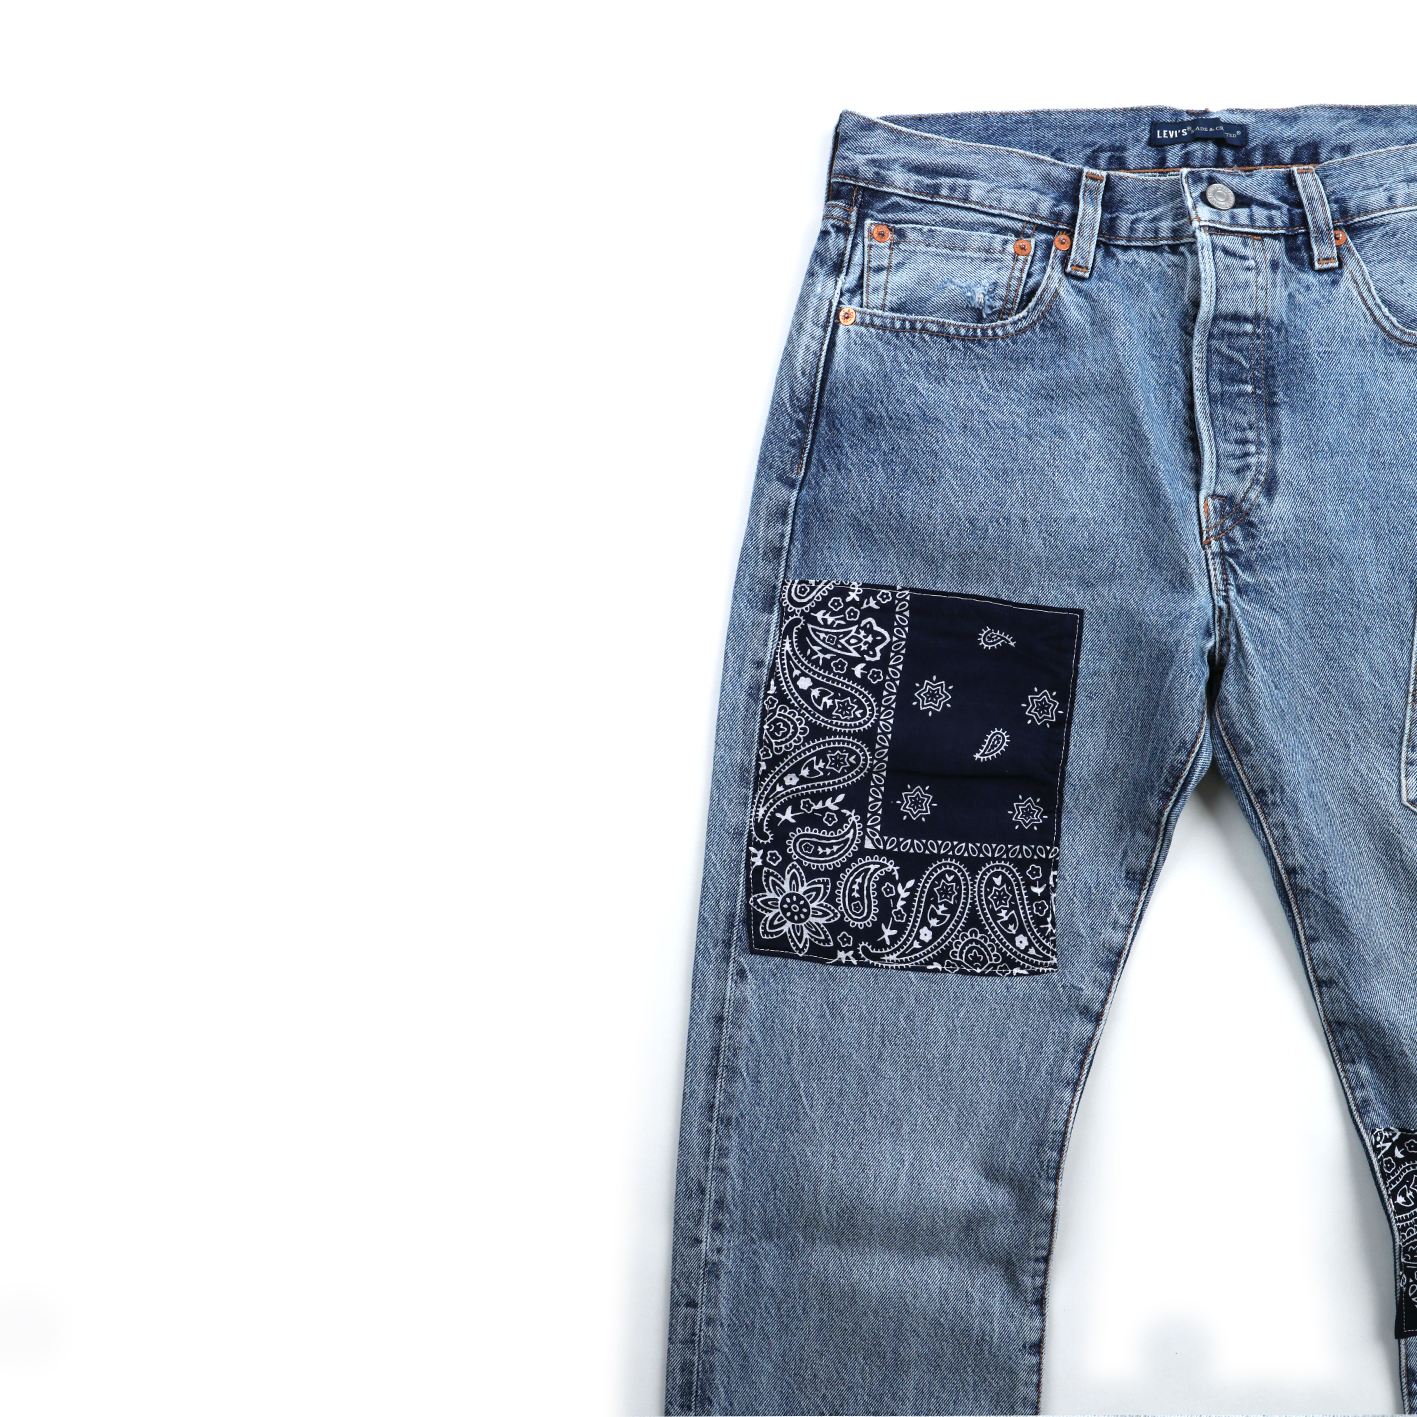 THE NEW ORDER + LEVI'S® MADE AND CRAFTED® MODEL 501® — THE NEW ORDER /